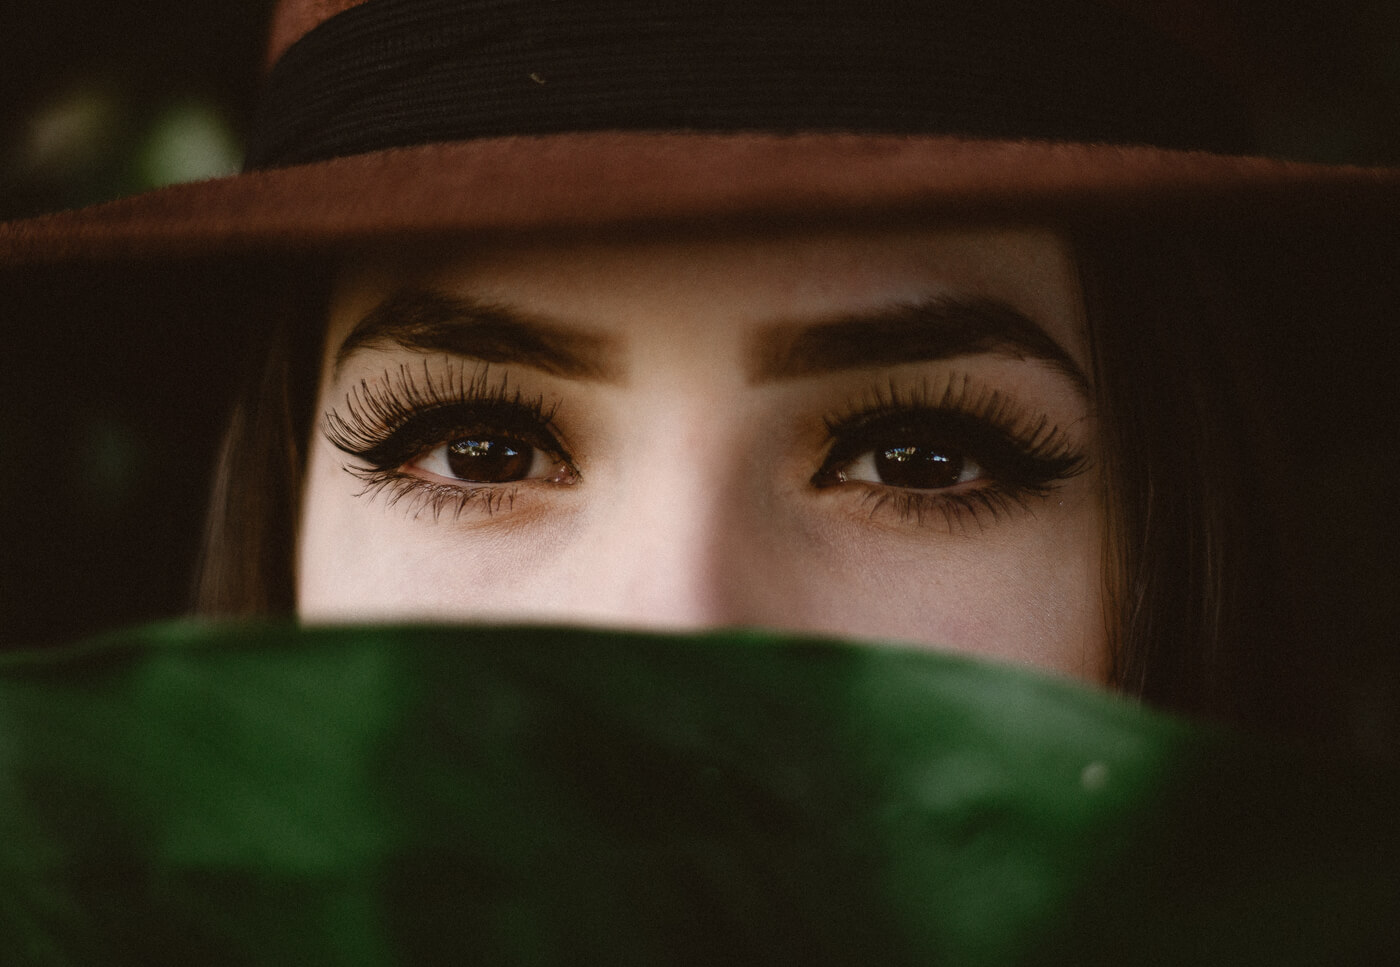 Why choose eyebrow & eyelash tinting treatments? Achieve an enhanced, natural look tailored to you. Find out more about patch tests, the hours of makeup time you'll save & the long lasting results. Get free beauty advice now.